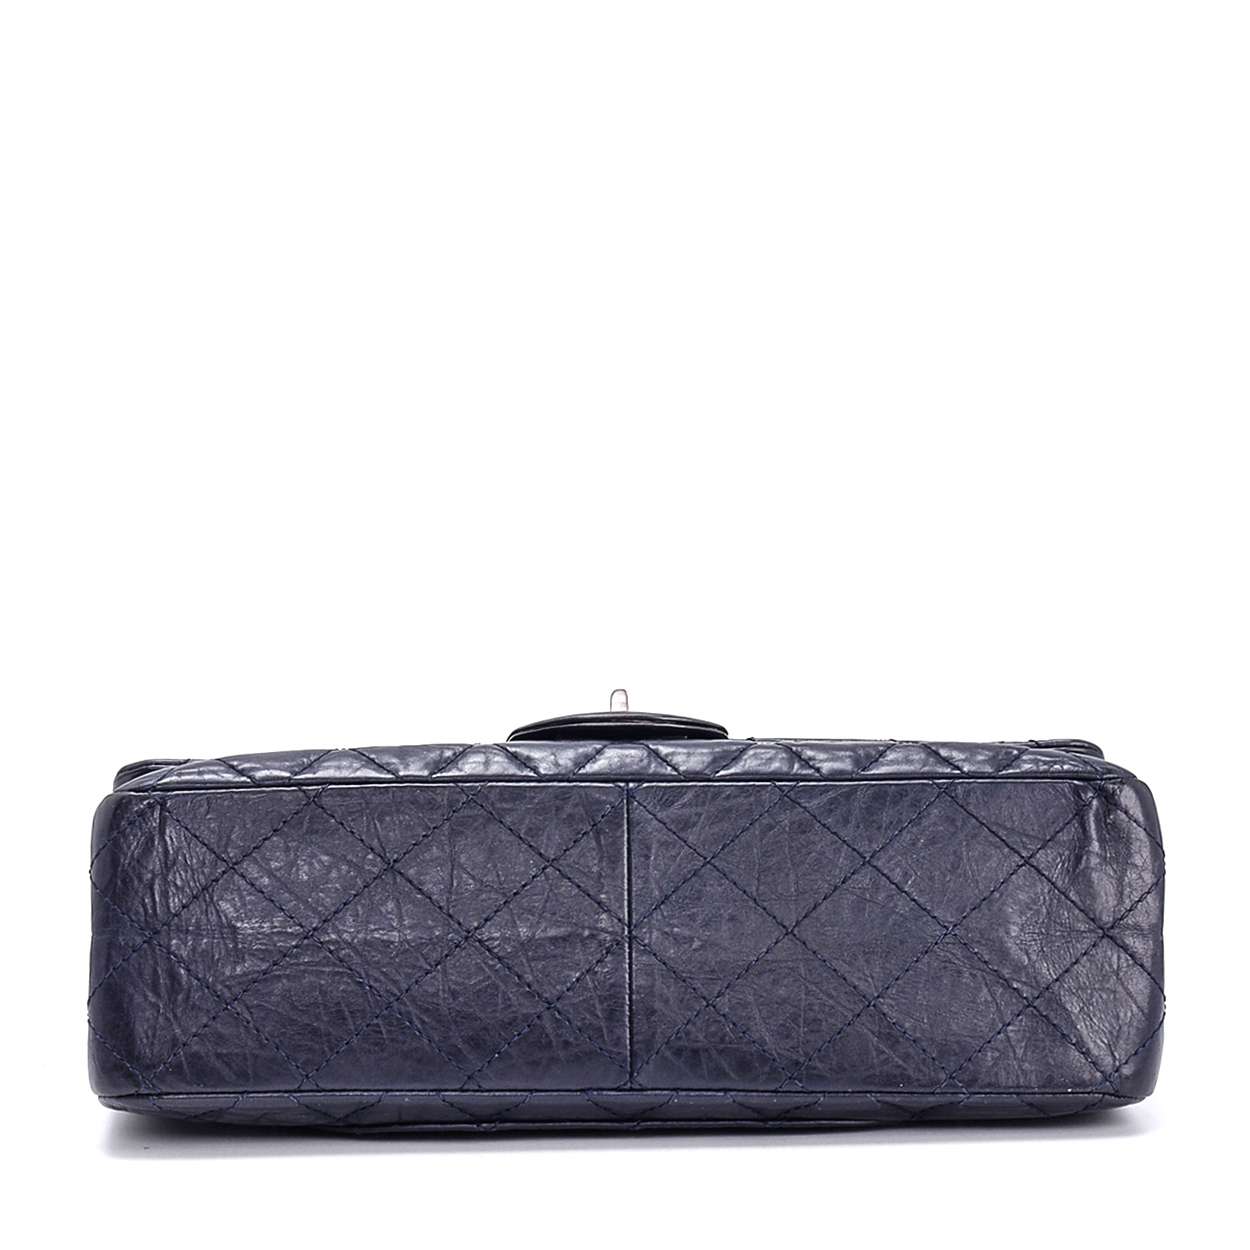 Chanel - Navy Blue Reissue Quilted Lambskin Leather 2.55 Large Flap Bag